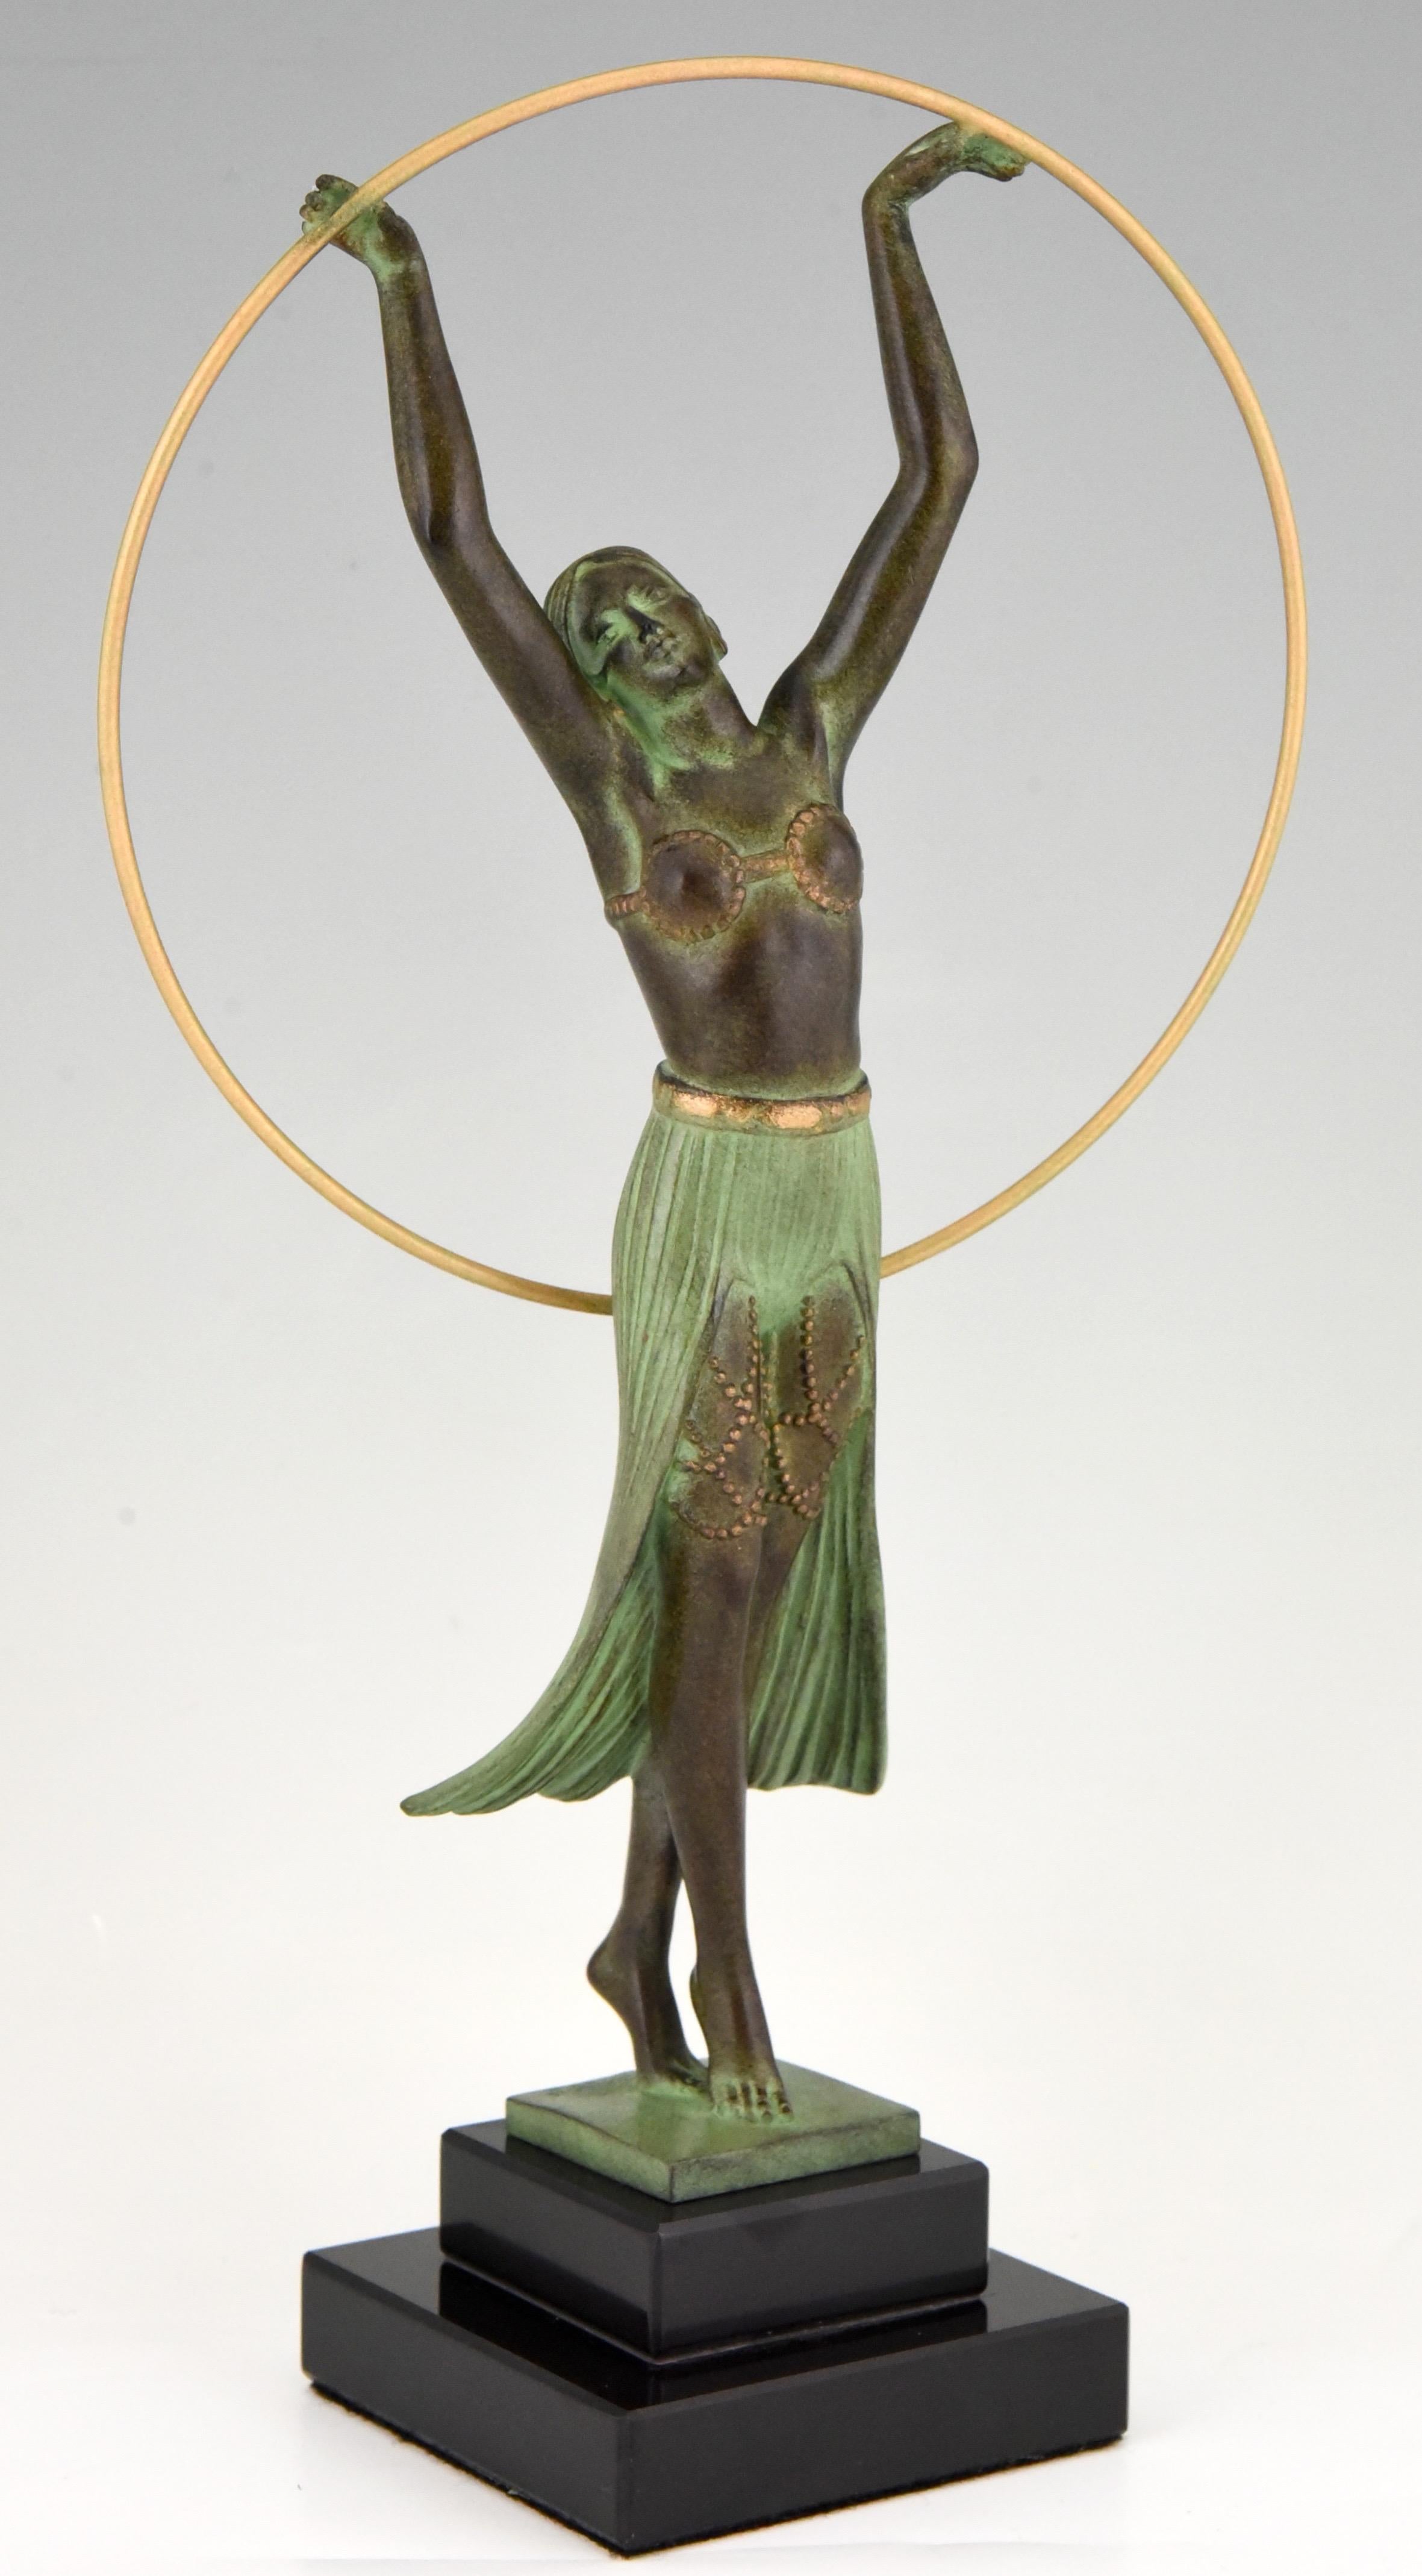 Elegant Art Deco style sculpture of a woman with hoop signed by the French artist C. Charles, cast at the Max Le Verrier foundry.
The art metal sculpture has a lovely green patina and stands on a Black marble base, designed circa 1930. 
Posthumous